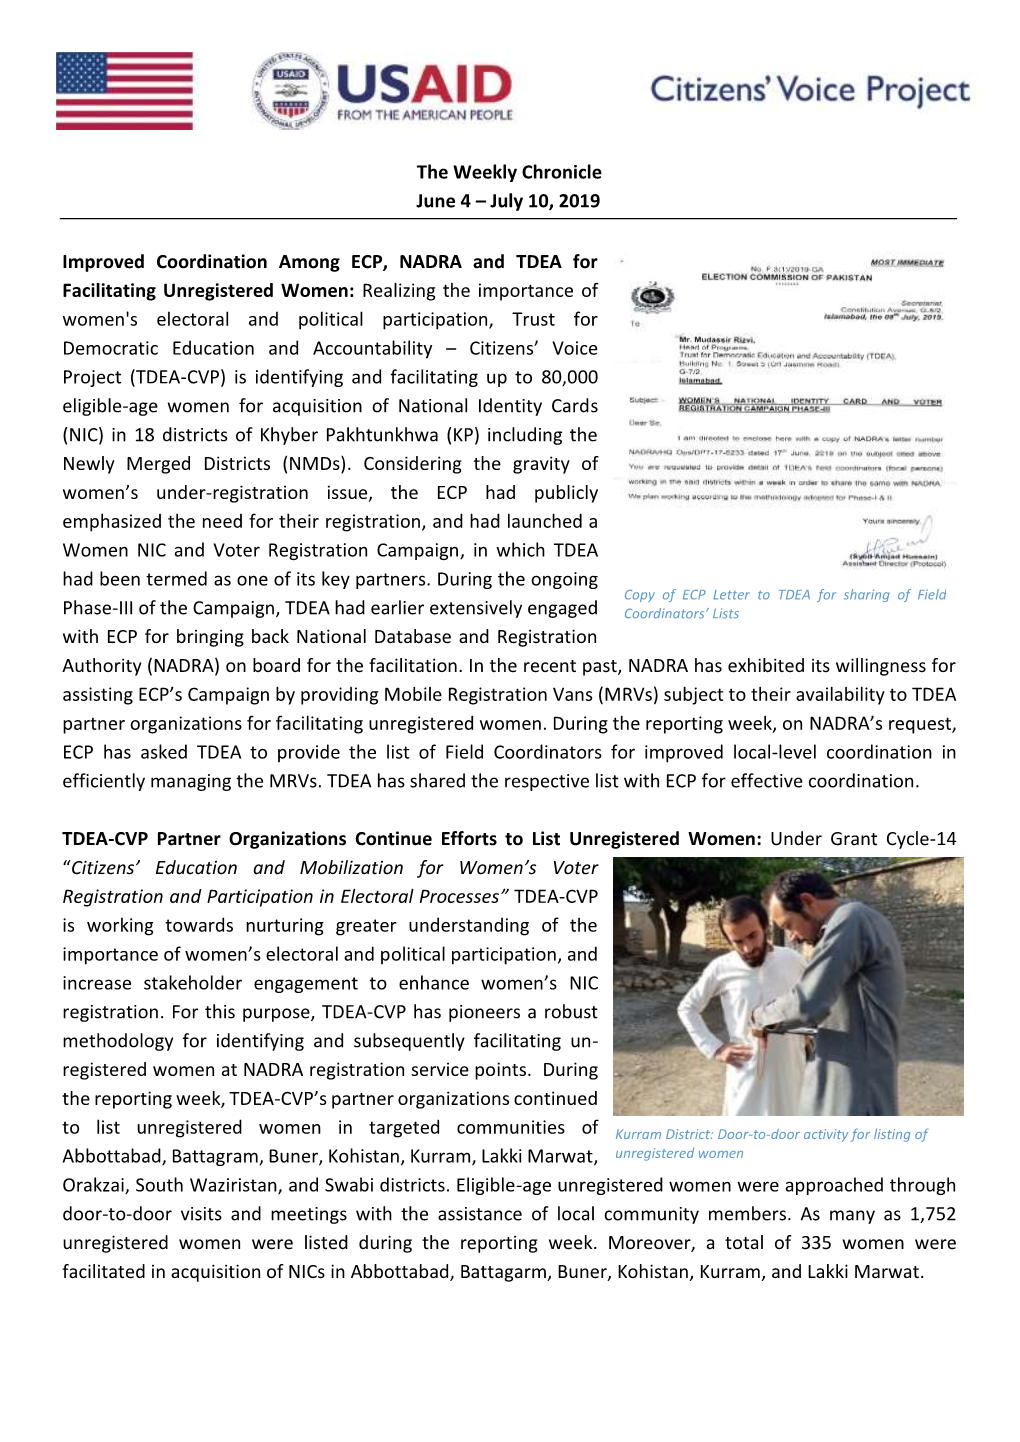 The Weekly Chronicle June 4 – July 10, 2019 Improved Coordination Among ECP, NADRA and TDEA for Facilitating Unregistered Wome